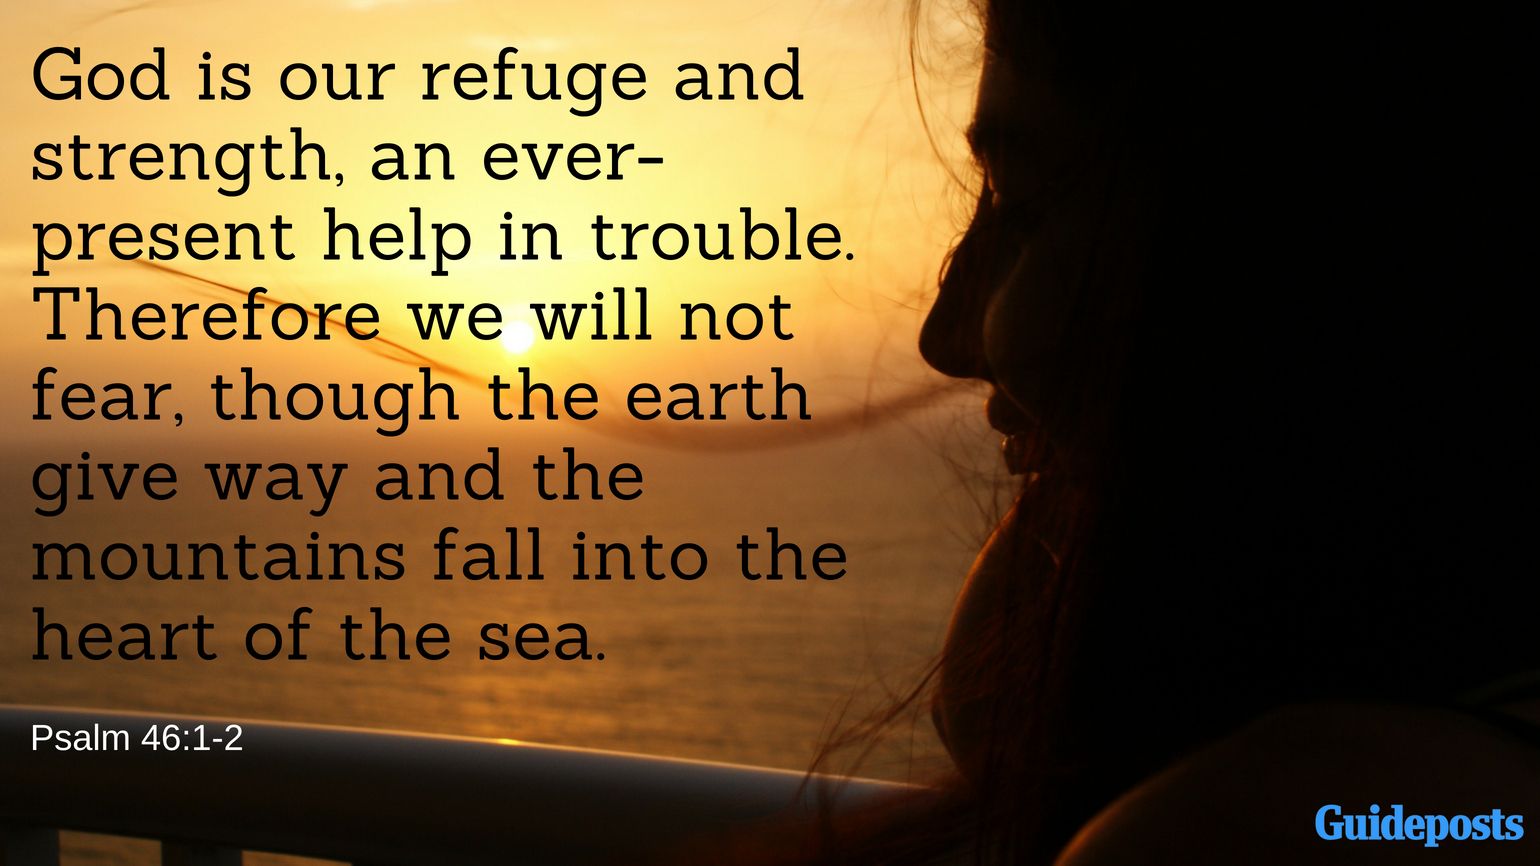 God is our refuge and strength, an ever-present help in trouble. Therefore we will not fear, though the earth give way and the mountains fall into the heart of the sea. Psalm 46:1-2